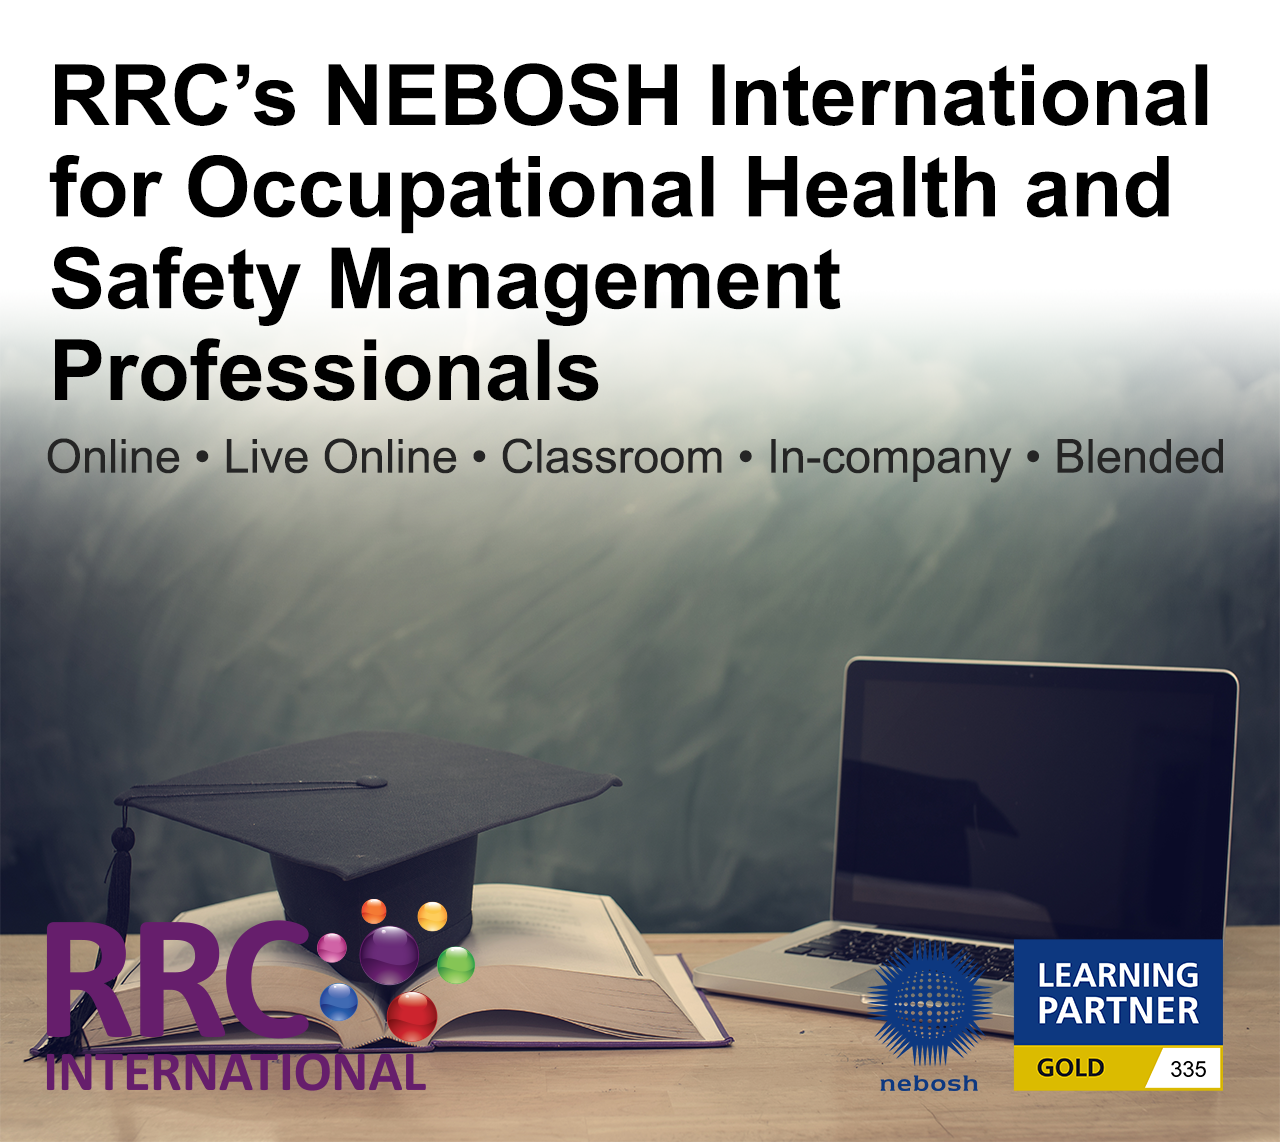 RRC's NEBOSH International Diploma for Occupational Health and Safety Management Professionals